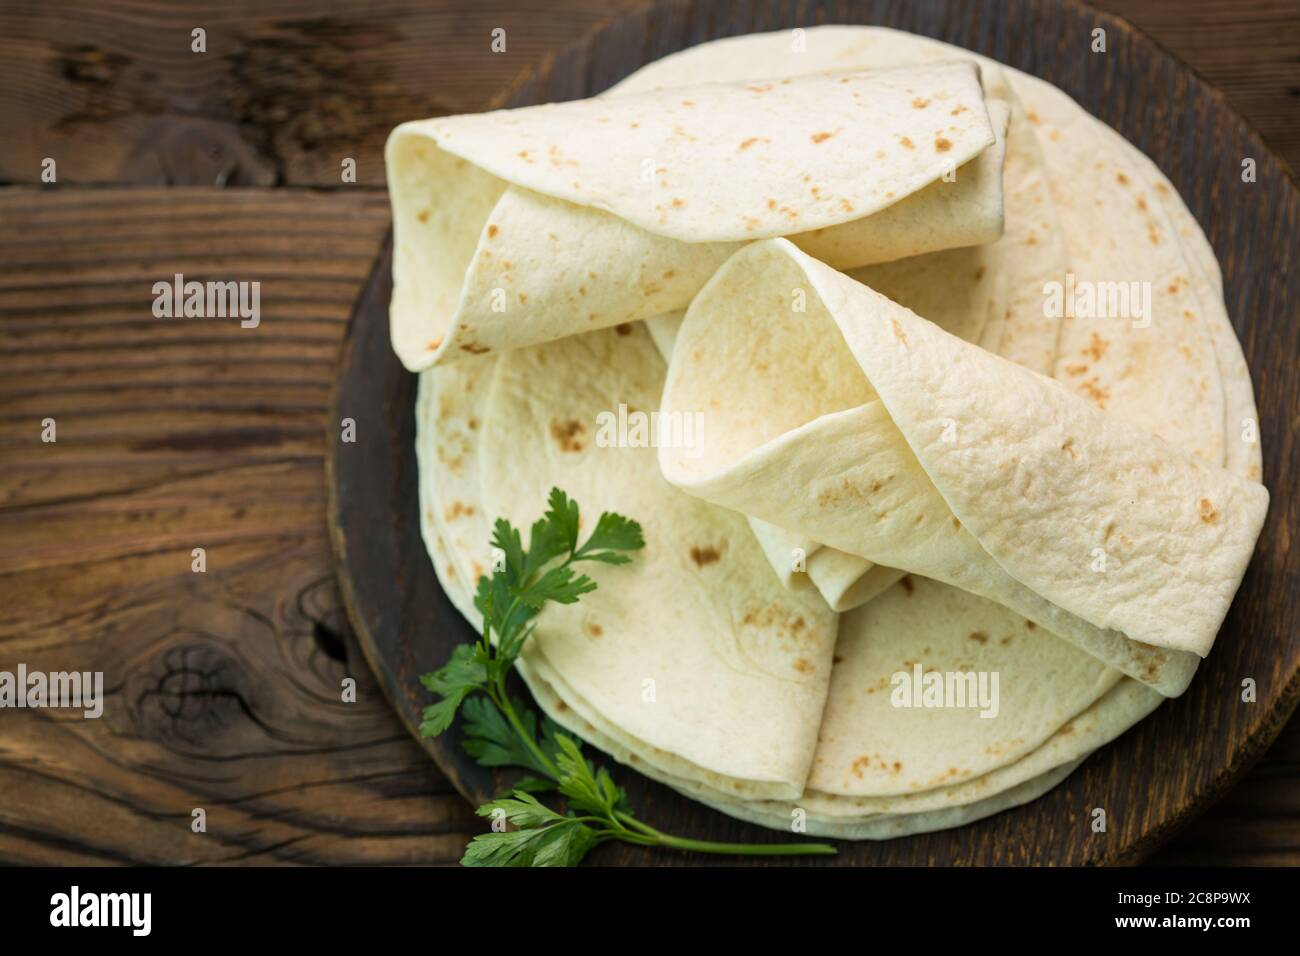 Whole wheat flour tortilla on the wooden table background Stock Photo